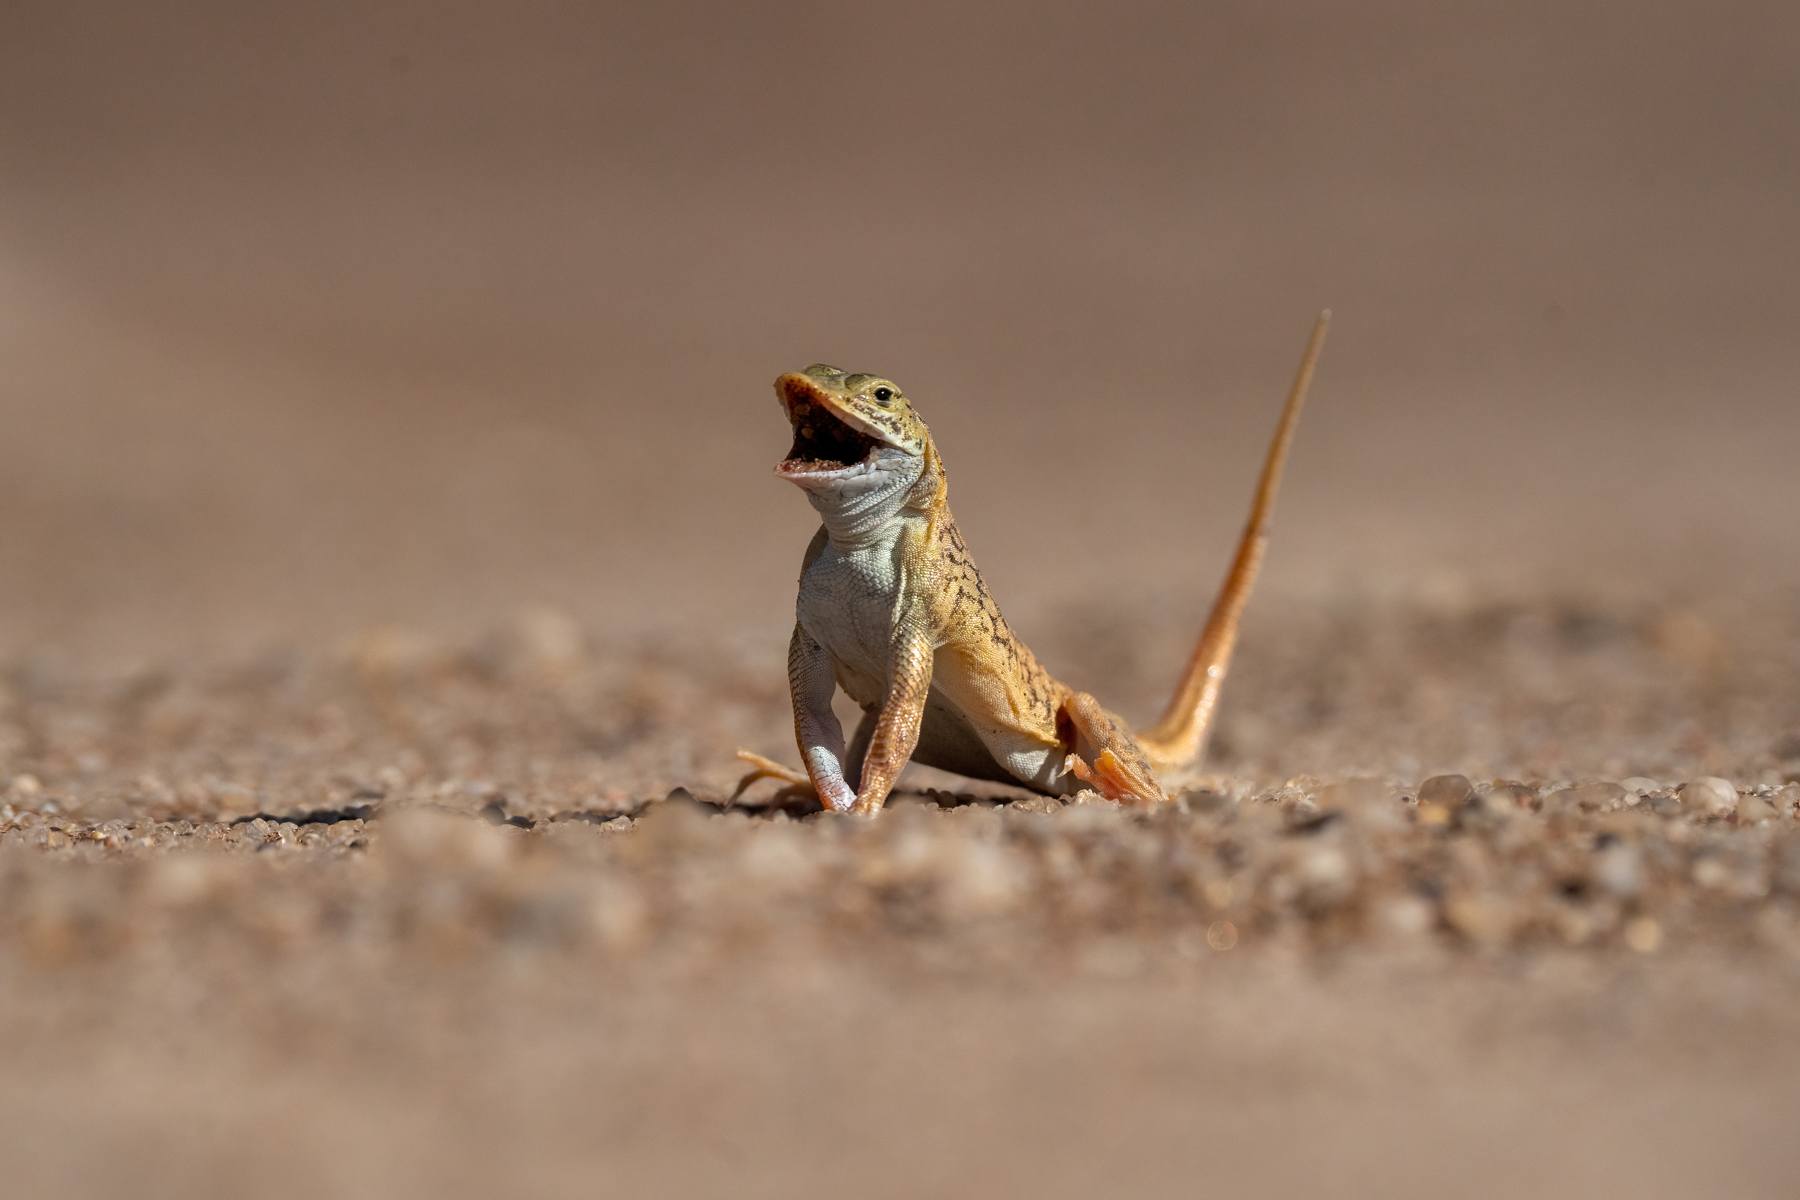 A Namib Sand-diving Lizard in threat display